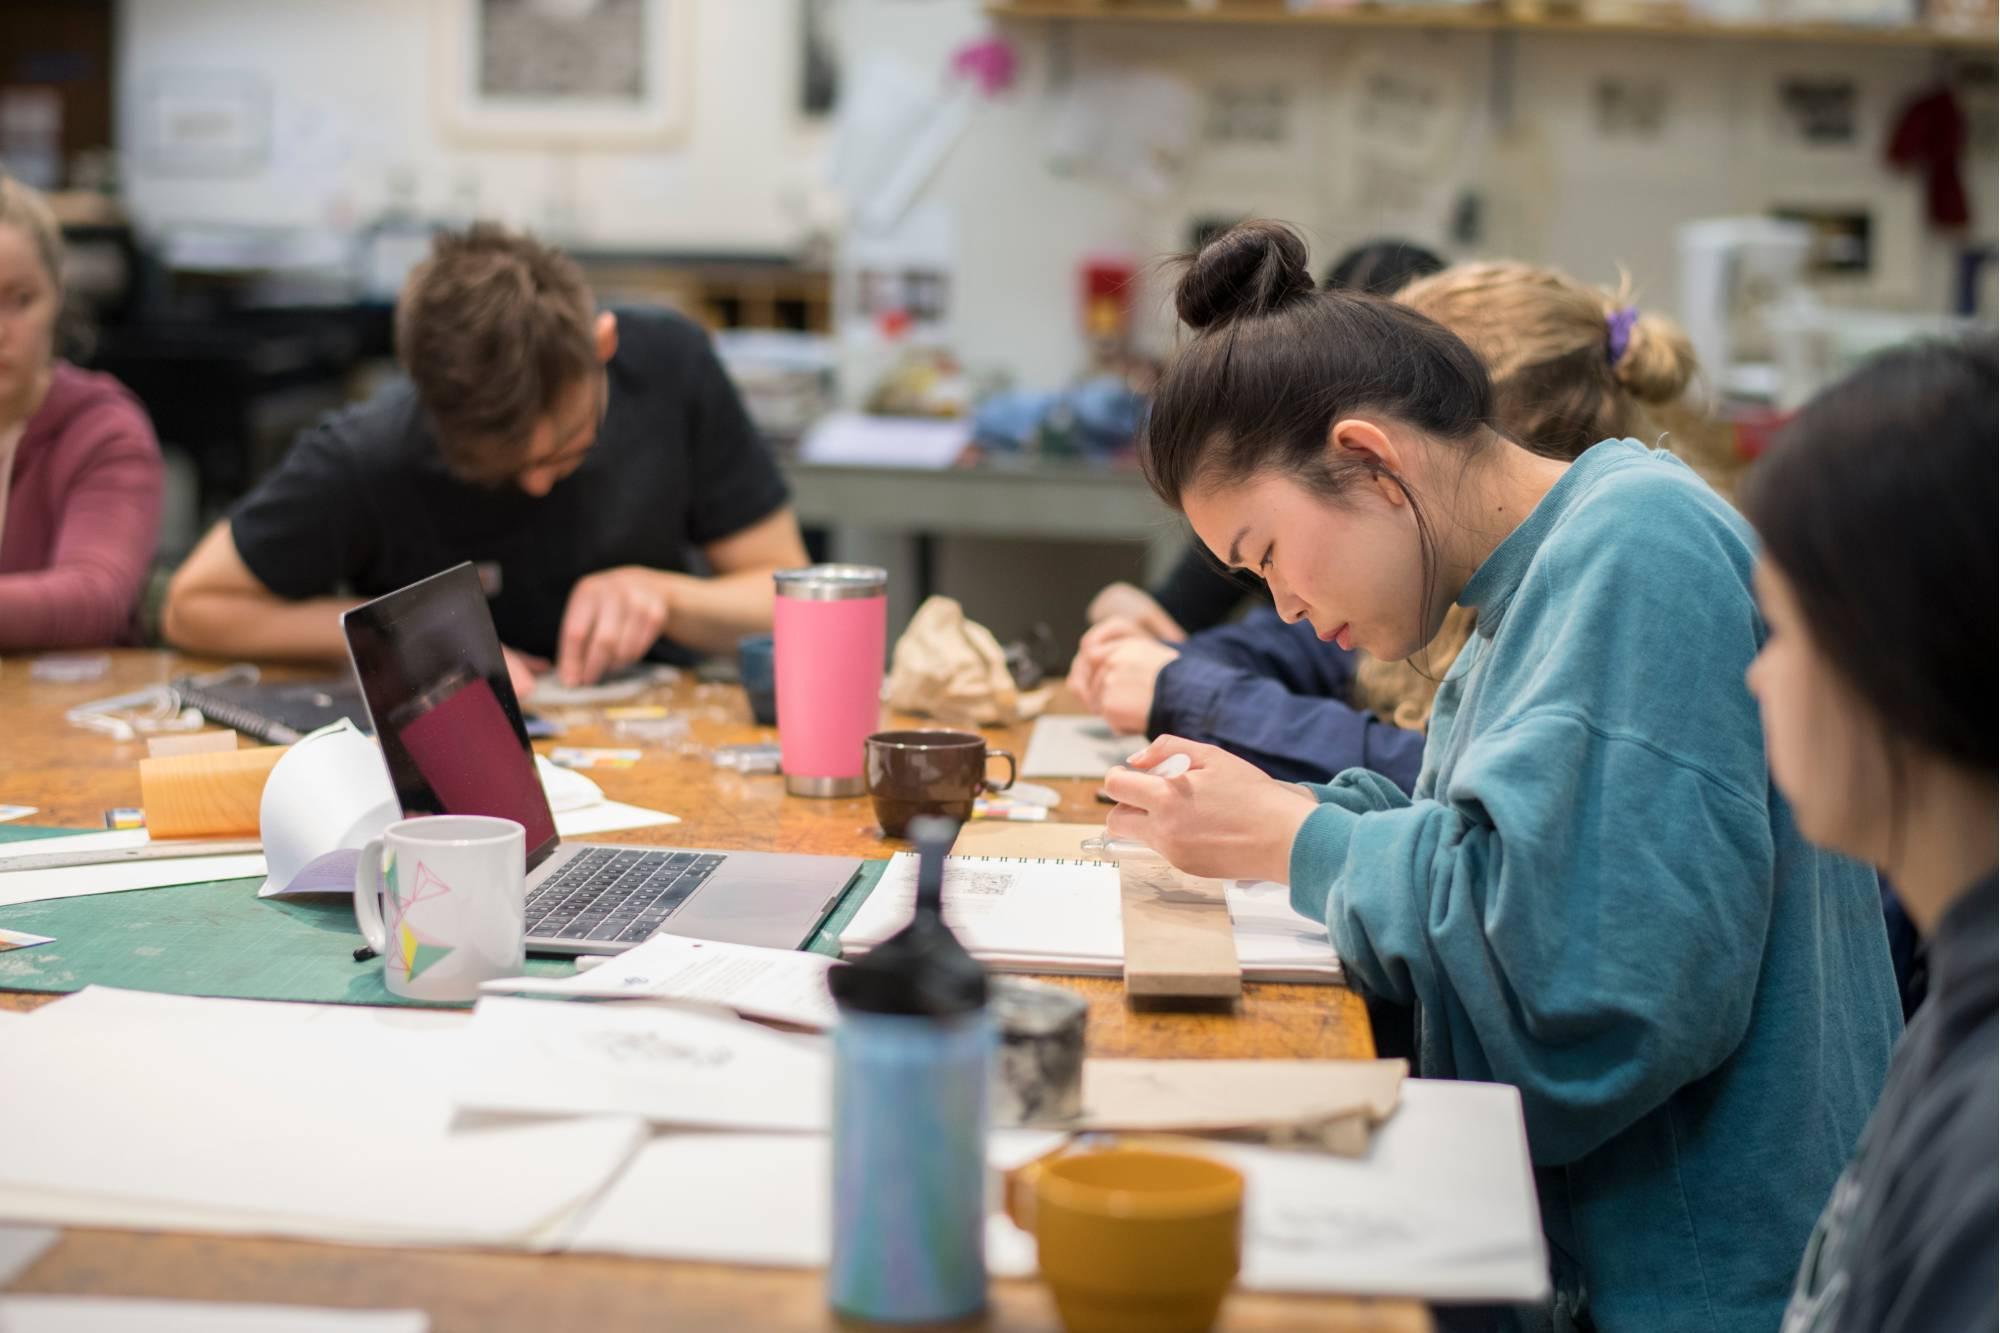 Image of students creating art